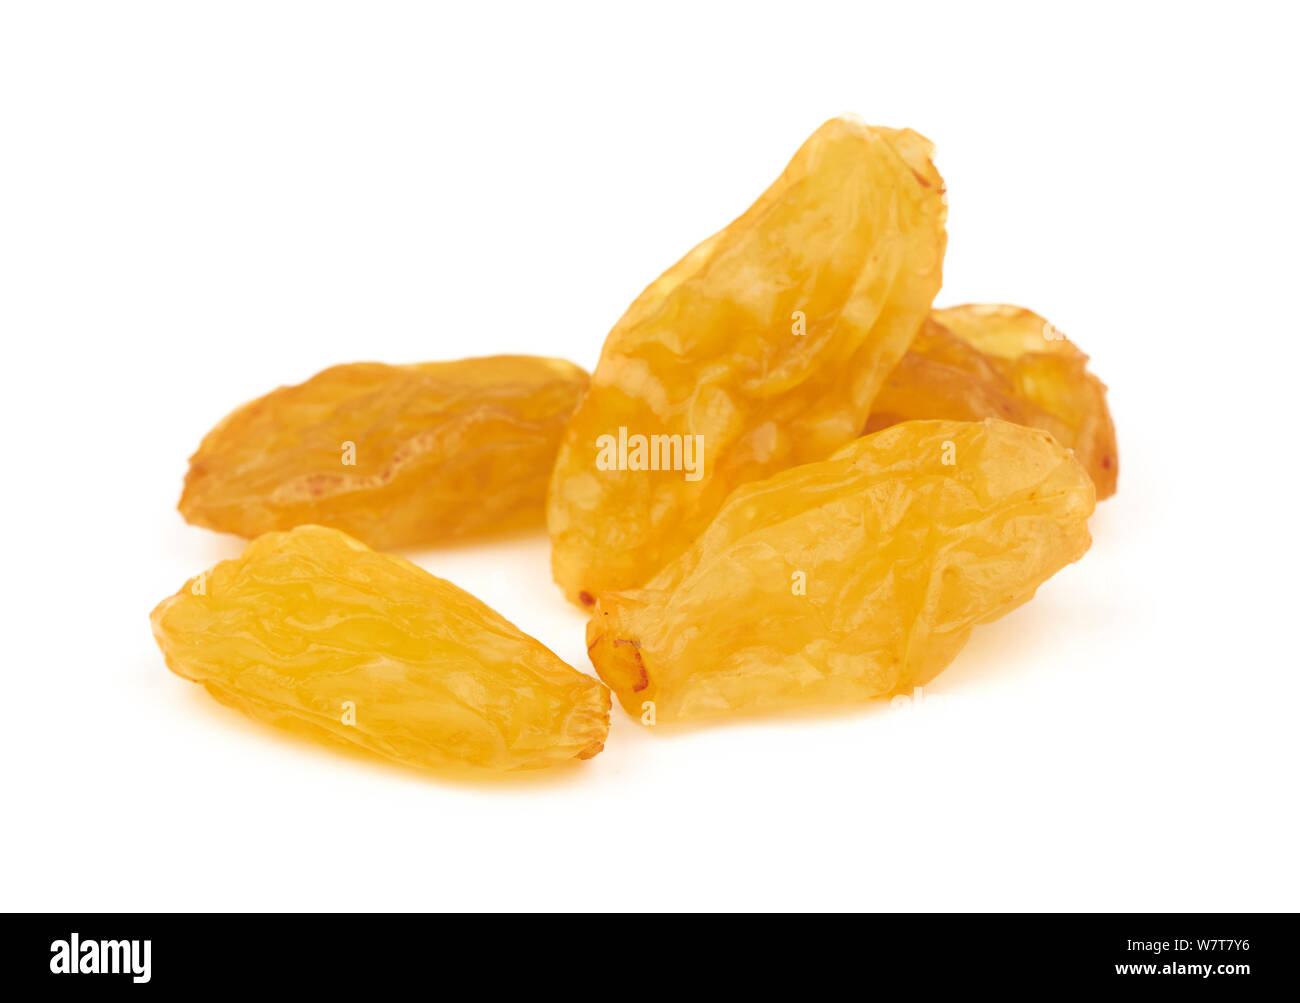 Dried raisins isolated on a white background Stock Photo - Alamy